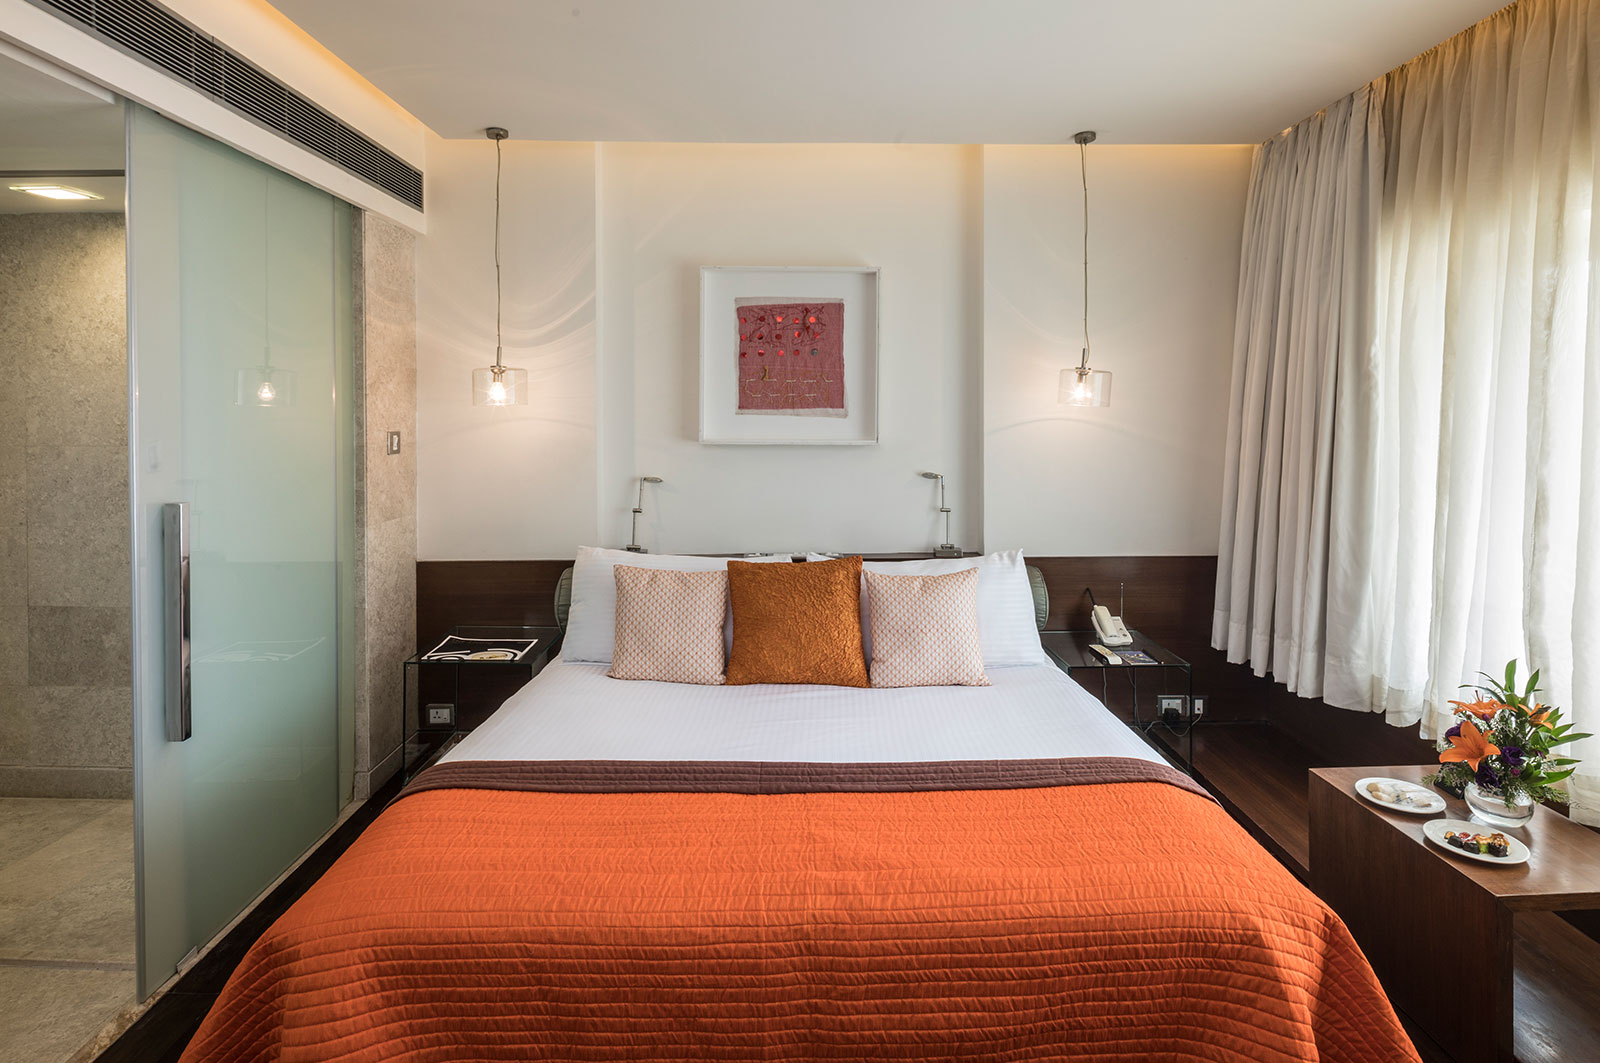 Luxury Rooms at The Park Hotels New Delhi